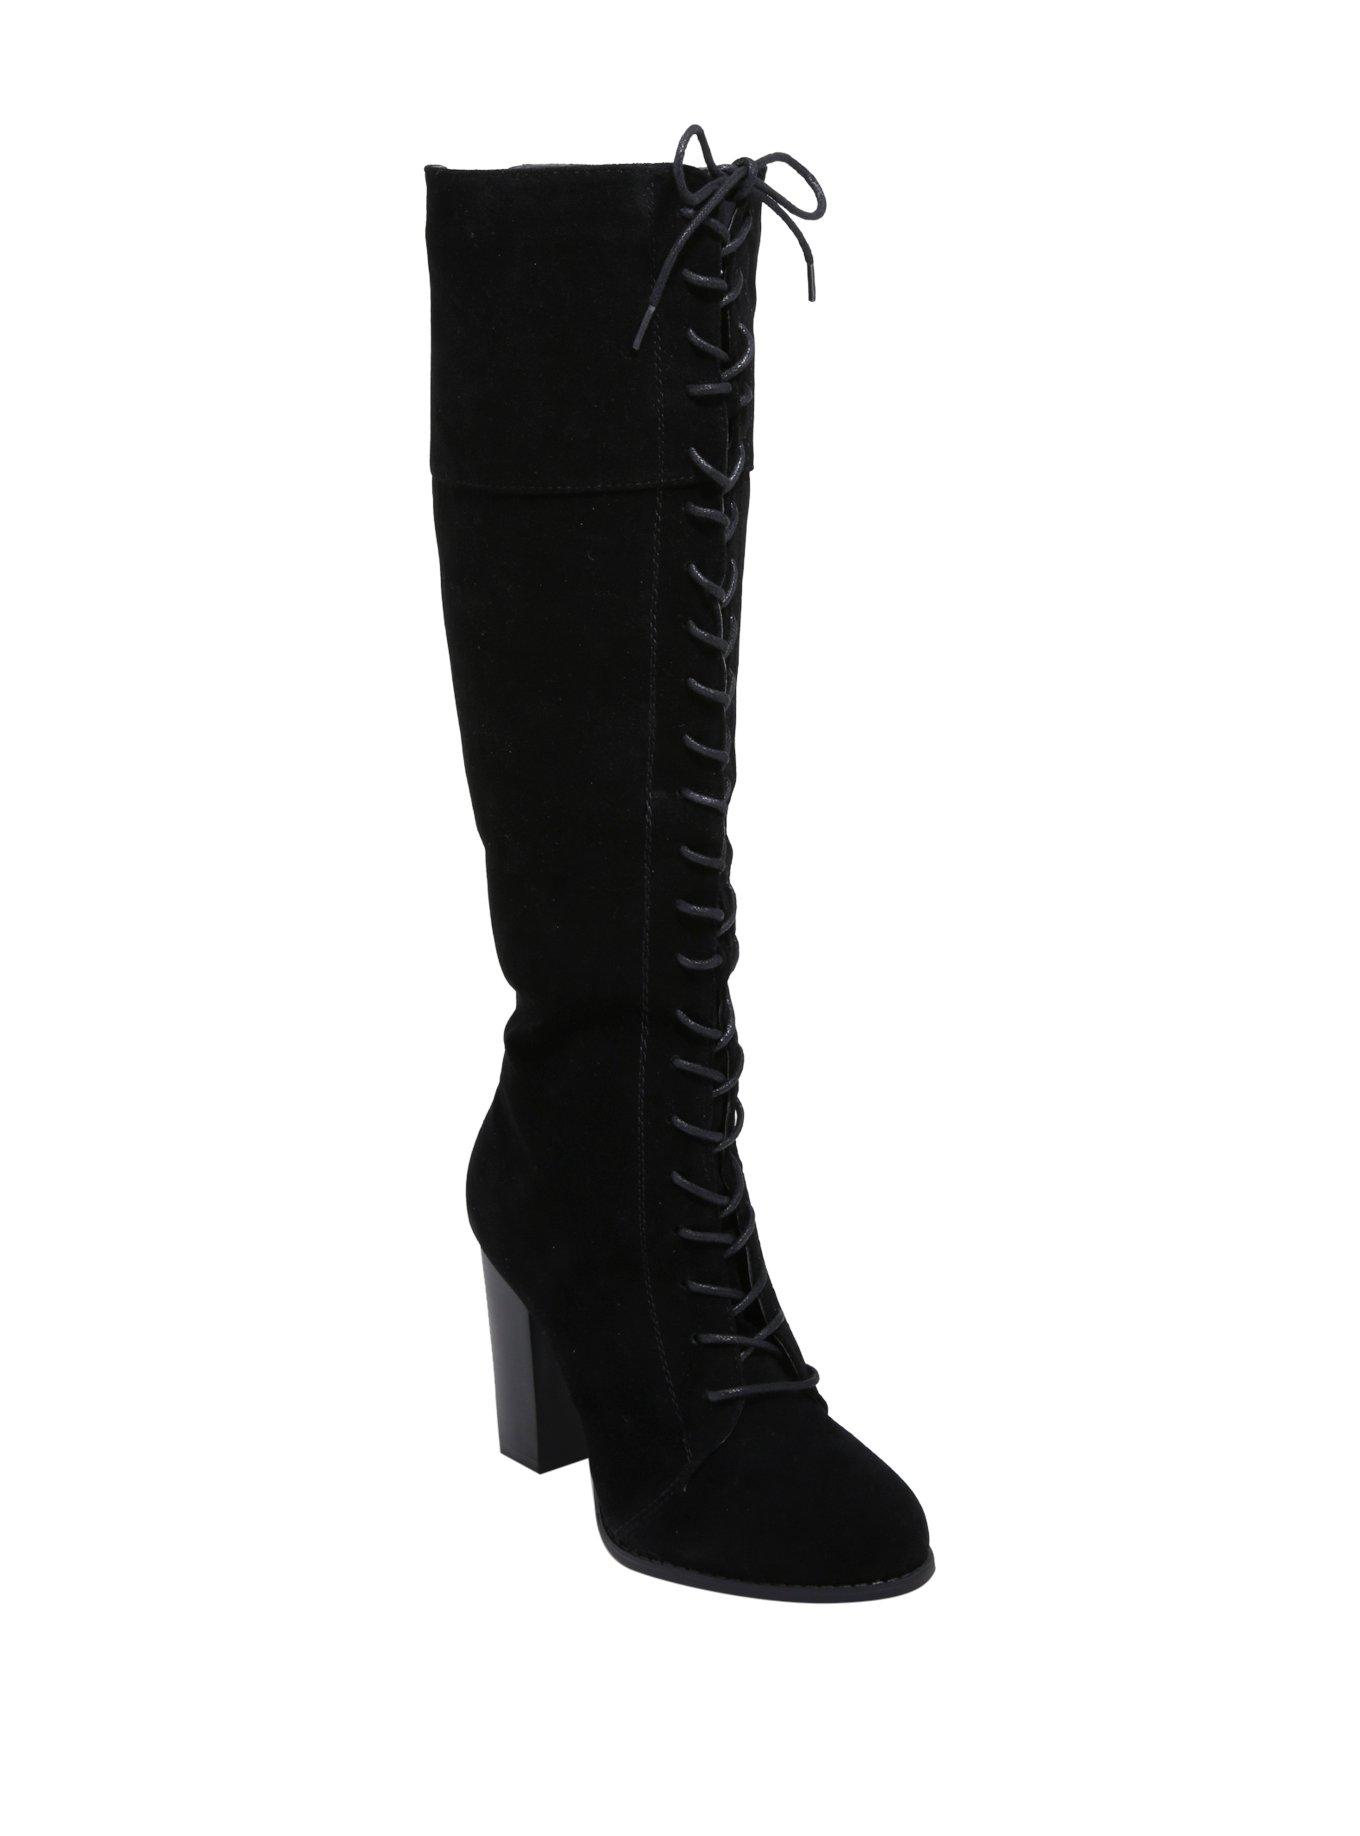 Black Suede Lace-Up Knee High Boots | Hot Topic